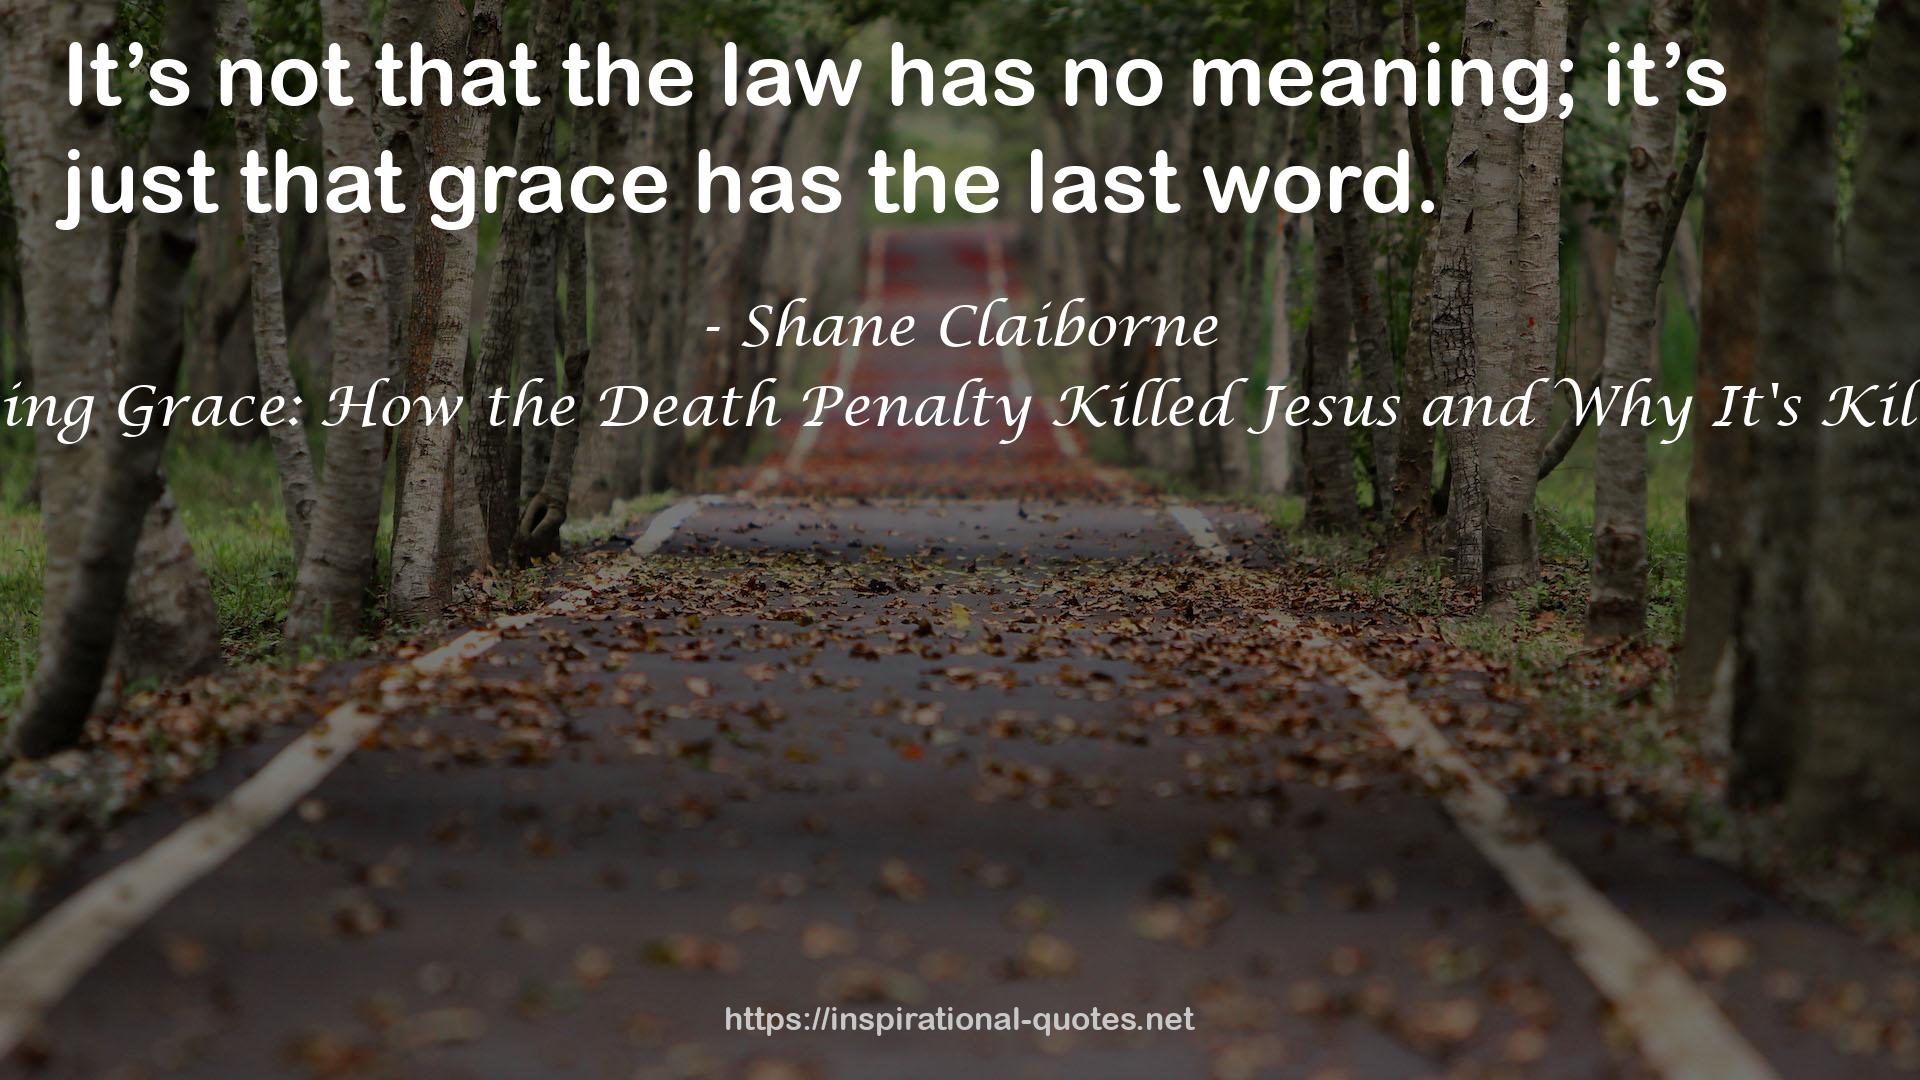 Executing Grace: How the Death Penalty Killed Jesus and Why It's Killing Us QUOTES